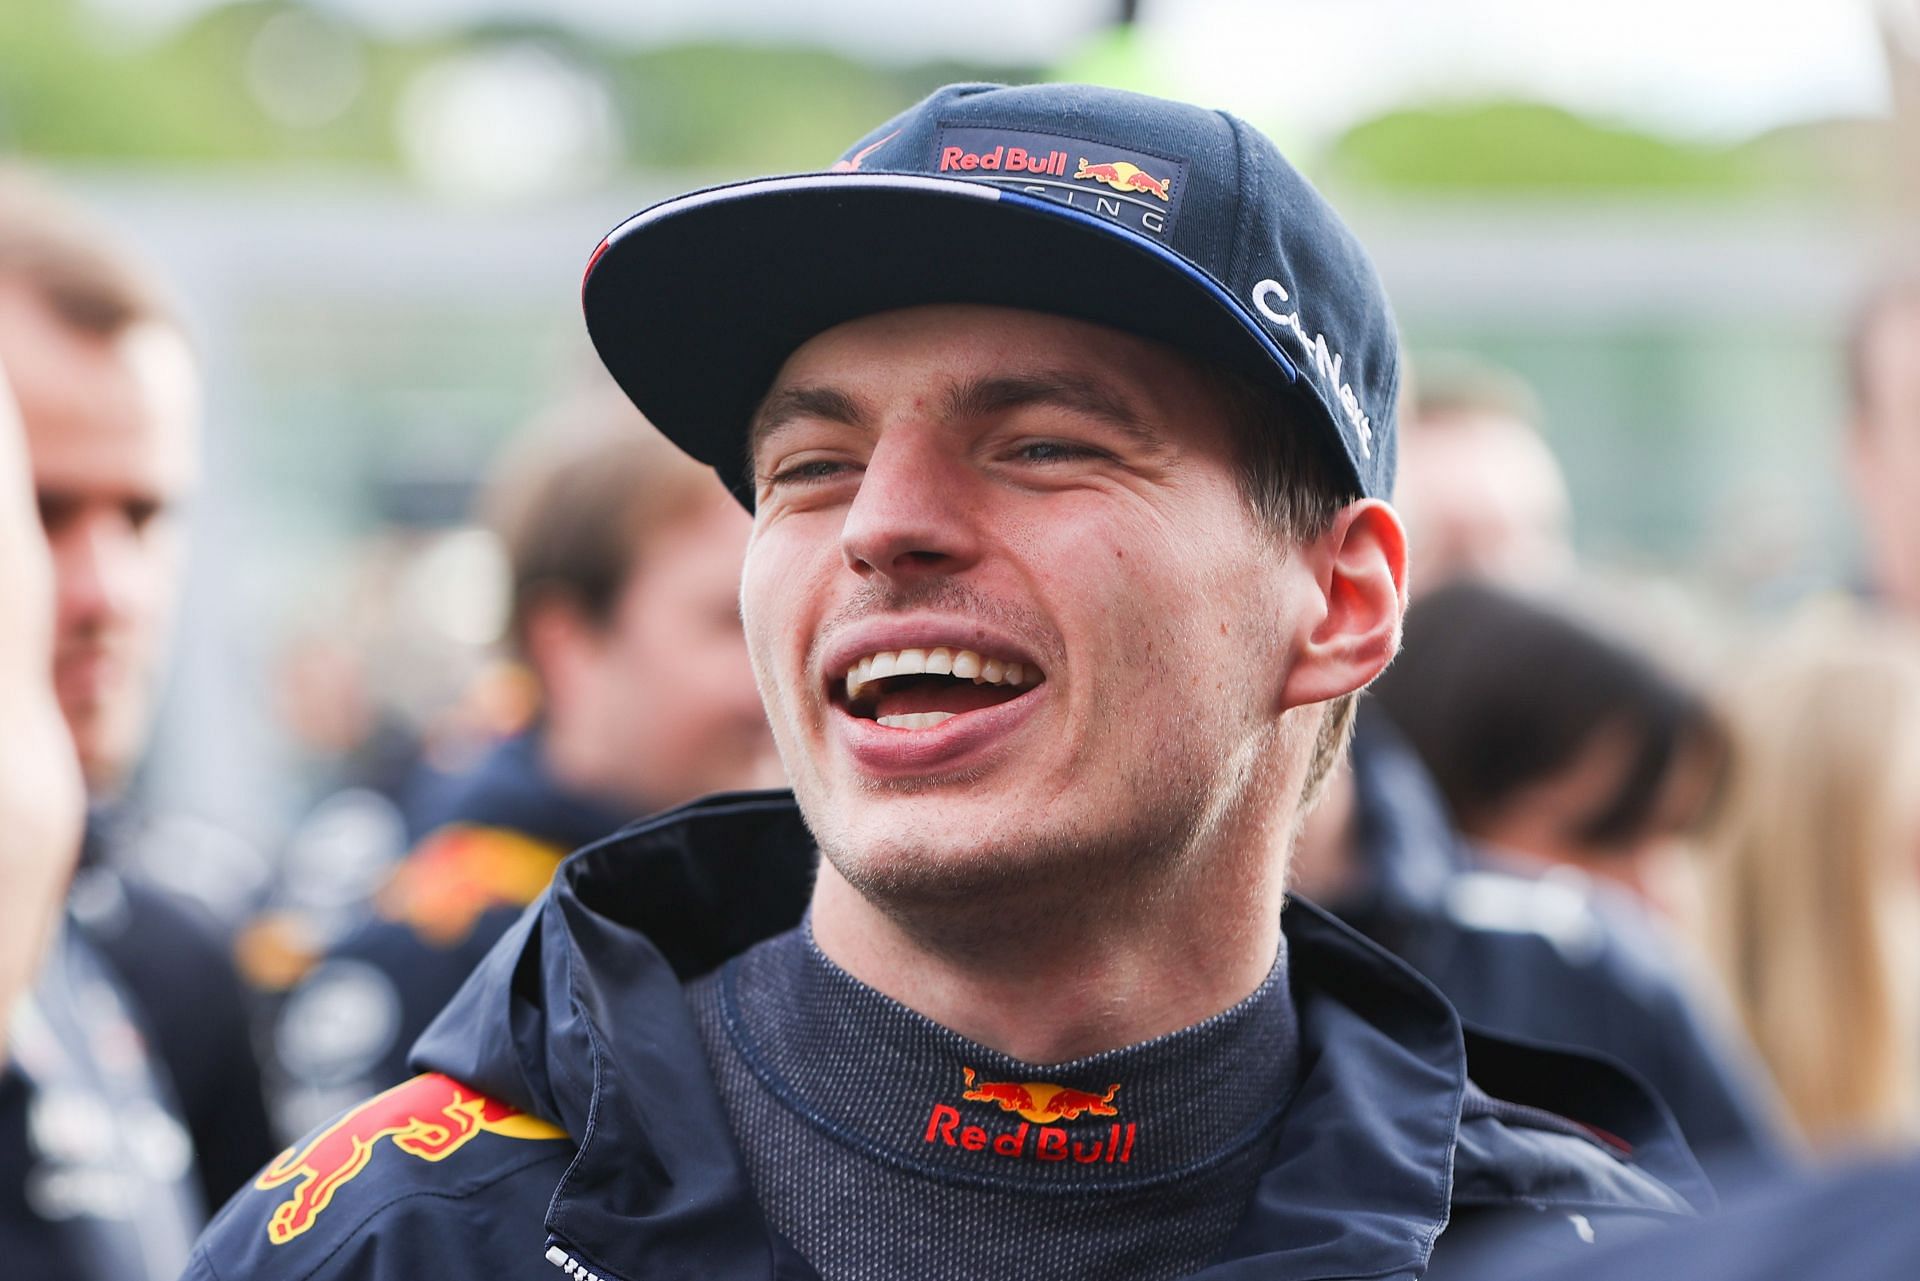 Max Verstappen of Red Bull Racing and The Netherlands smiles before the team celebration photo during the F1 Grand Prix of Emilia Romagna at Autodromo Enzo e Dino Ferrari on April 24, 2022 (Photo by Peter Fox/Getty Images)